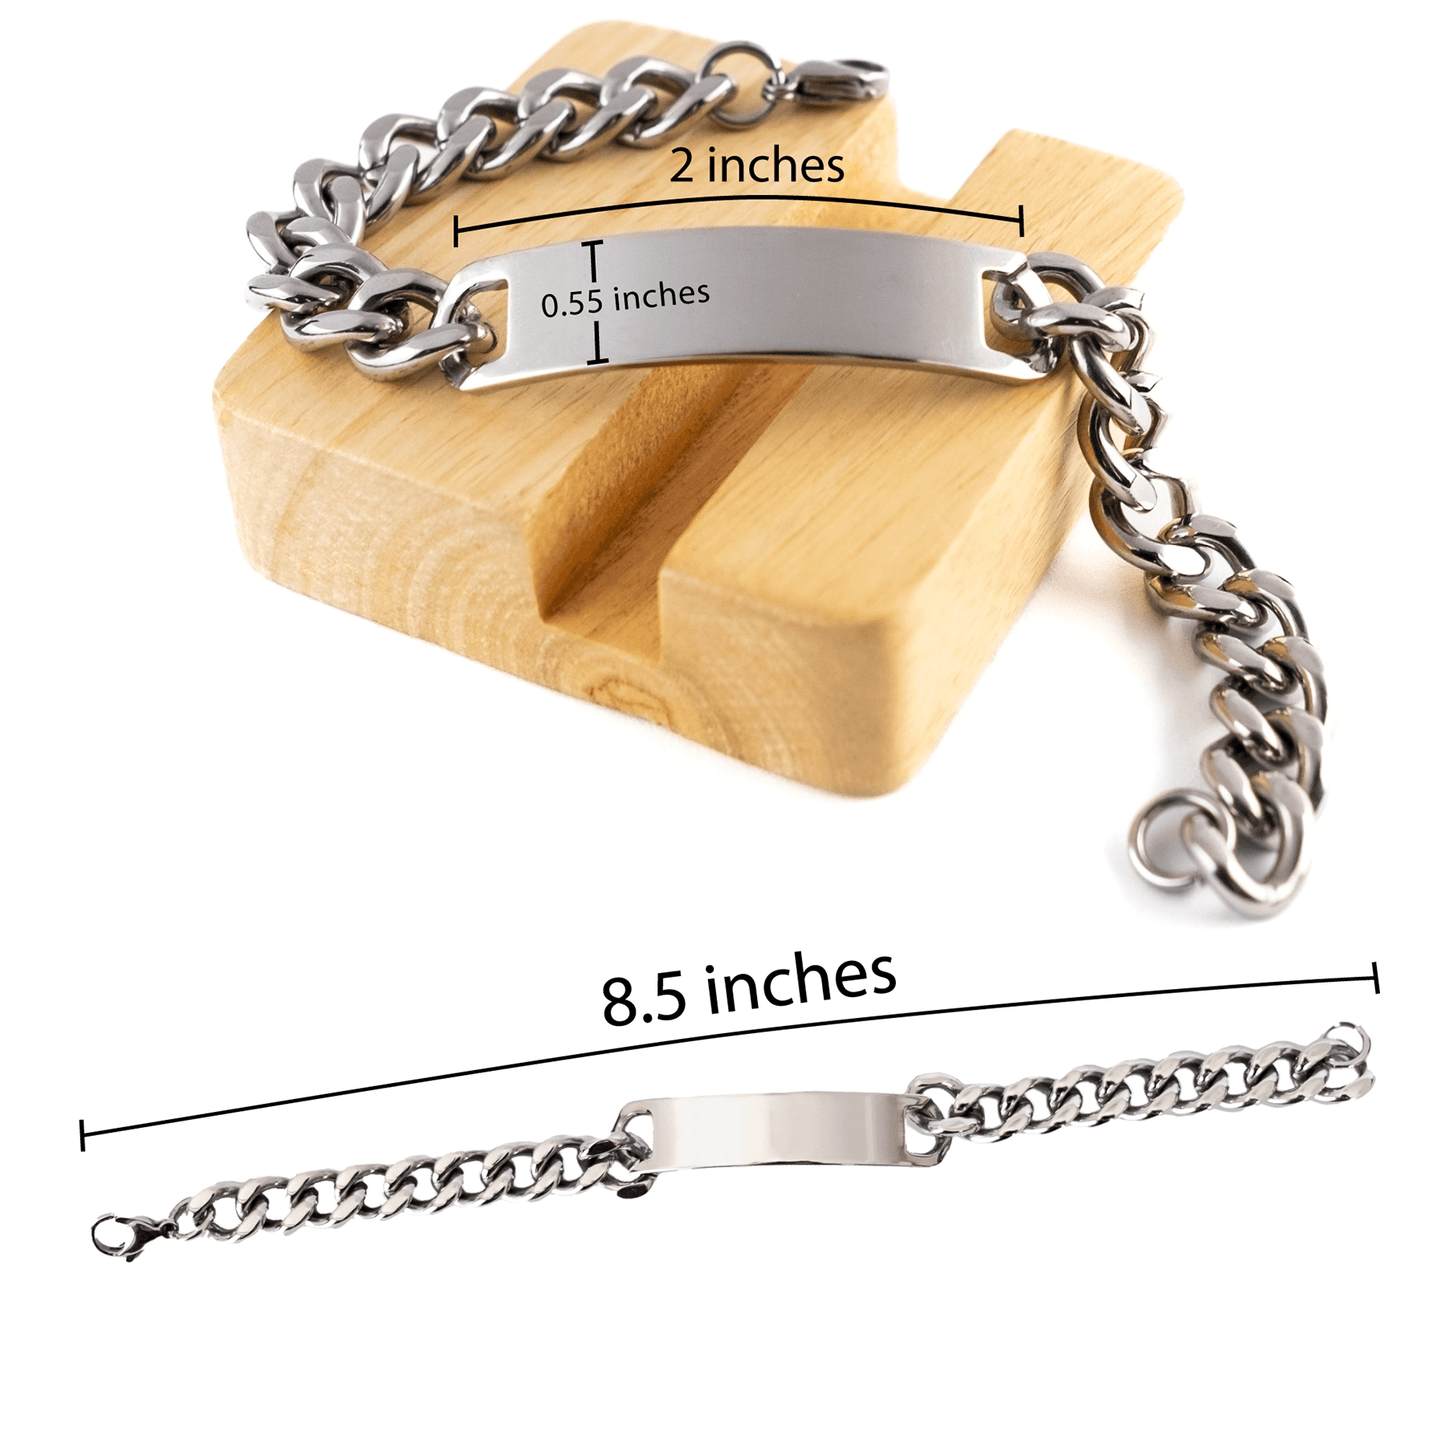 Heartfelt Soulmate Engraved Cuban Chain Stainless Steel Bracelet - Life is Learning to Dance in the Rain, I'm always with you - Birthday, Christmas Holiday Gifts - Mallard Moon Gift Shop